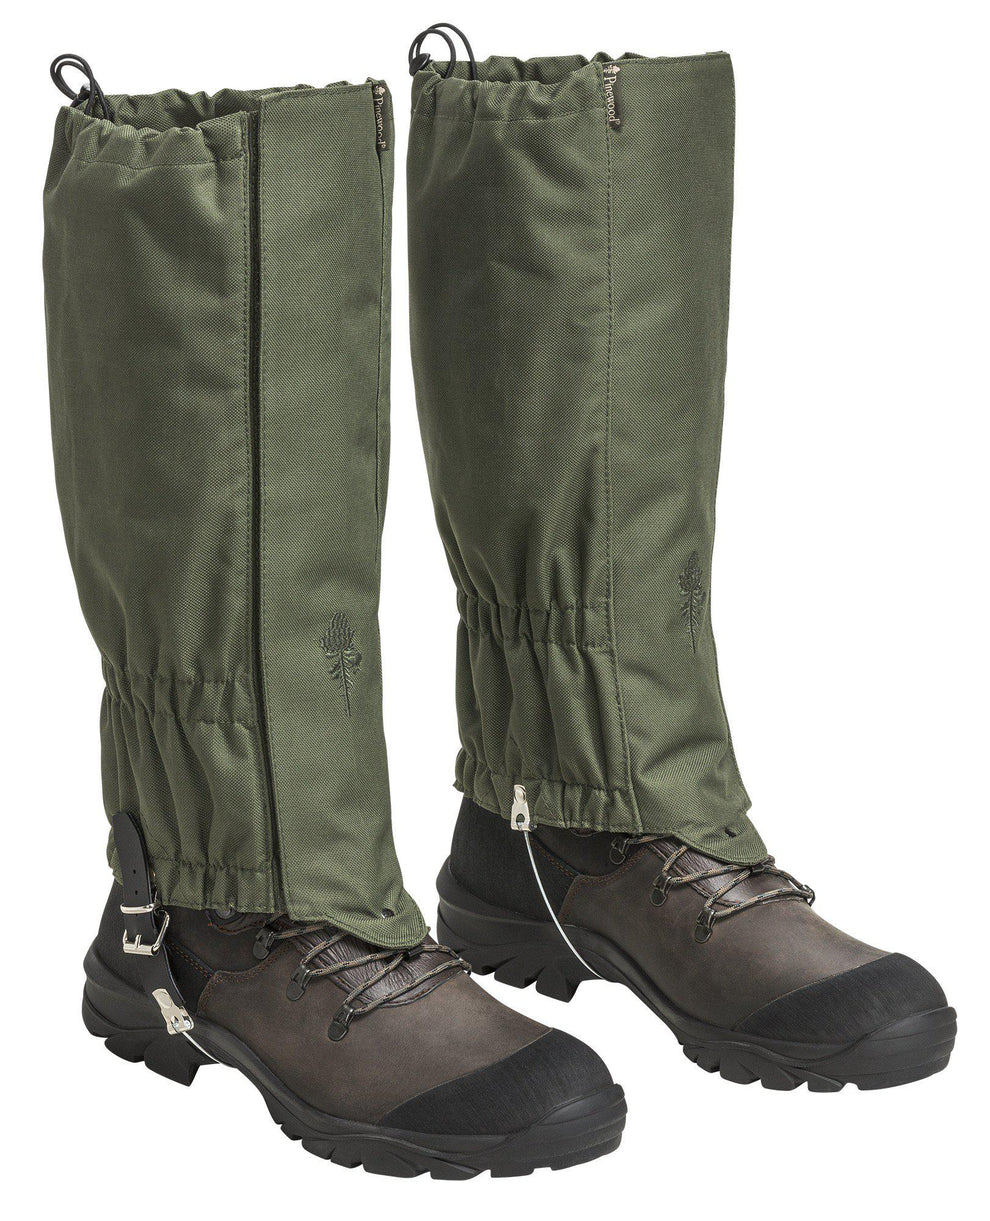 1102-135-01_Gaiters_BLANK_Active-Moss_BLANK_Green